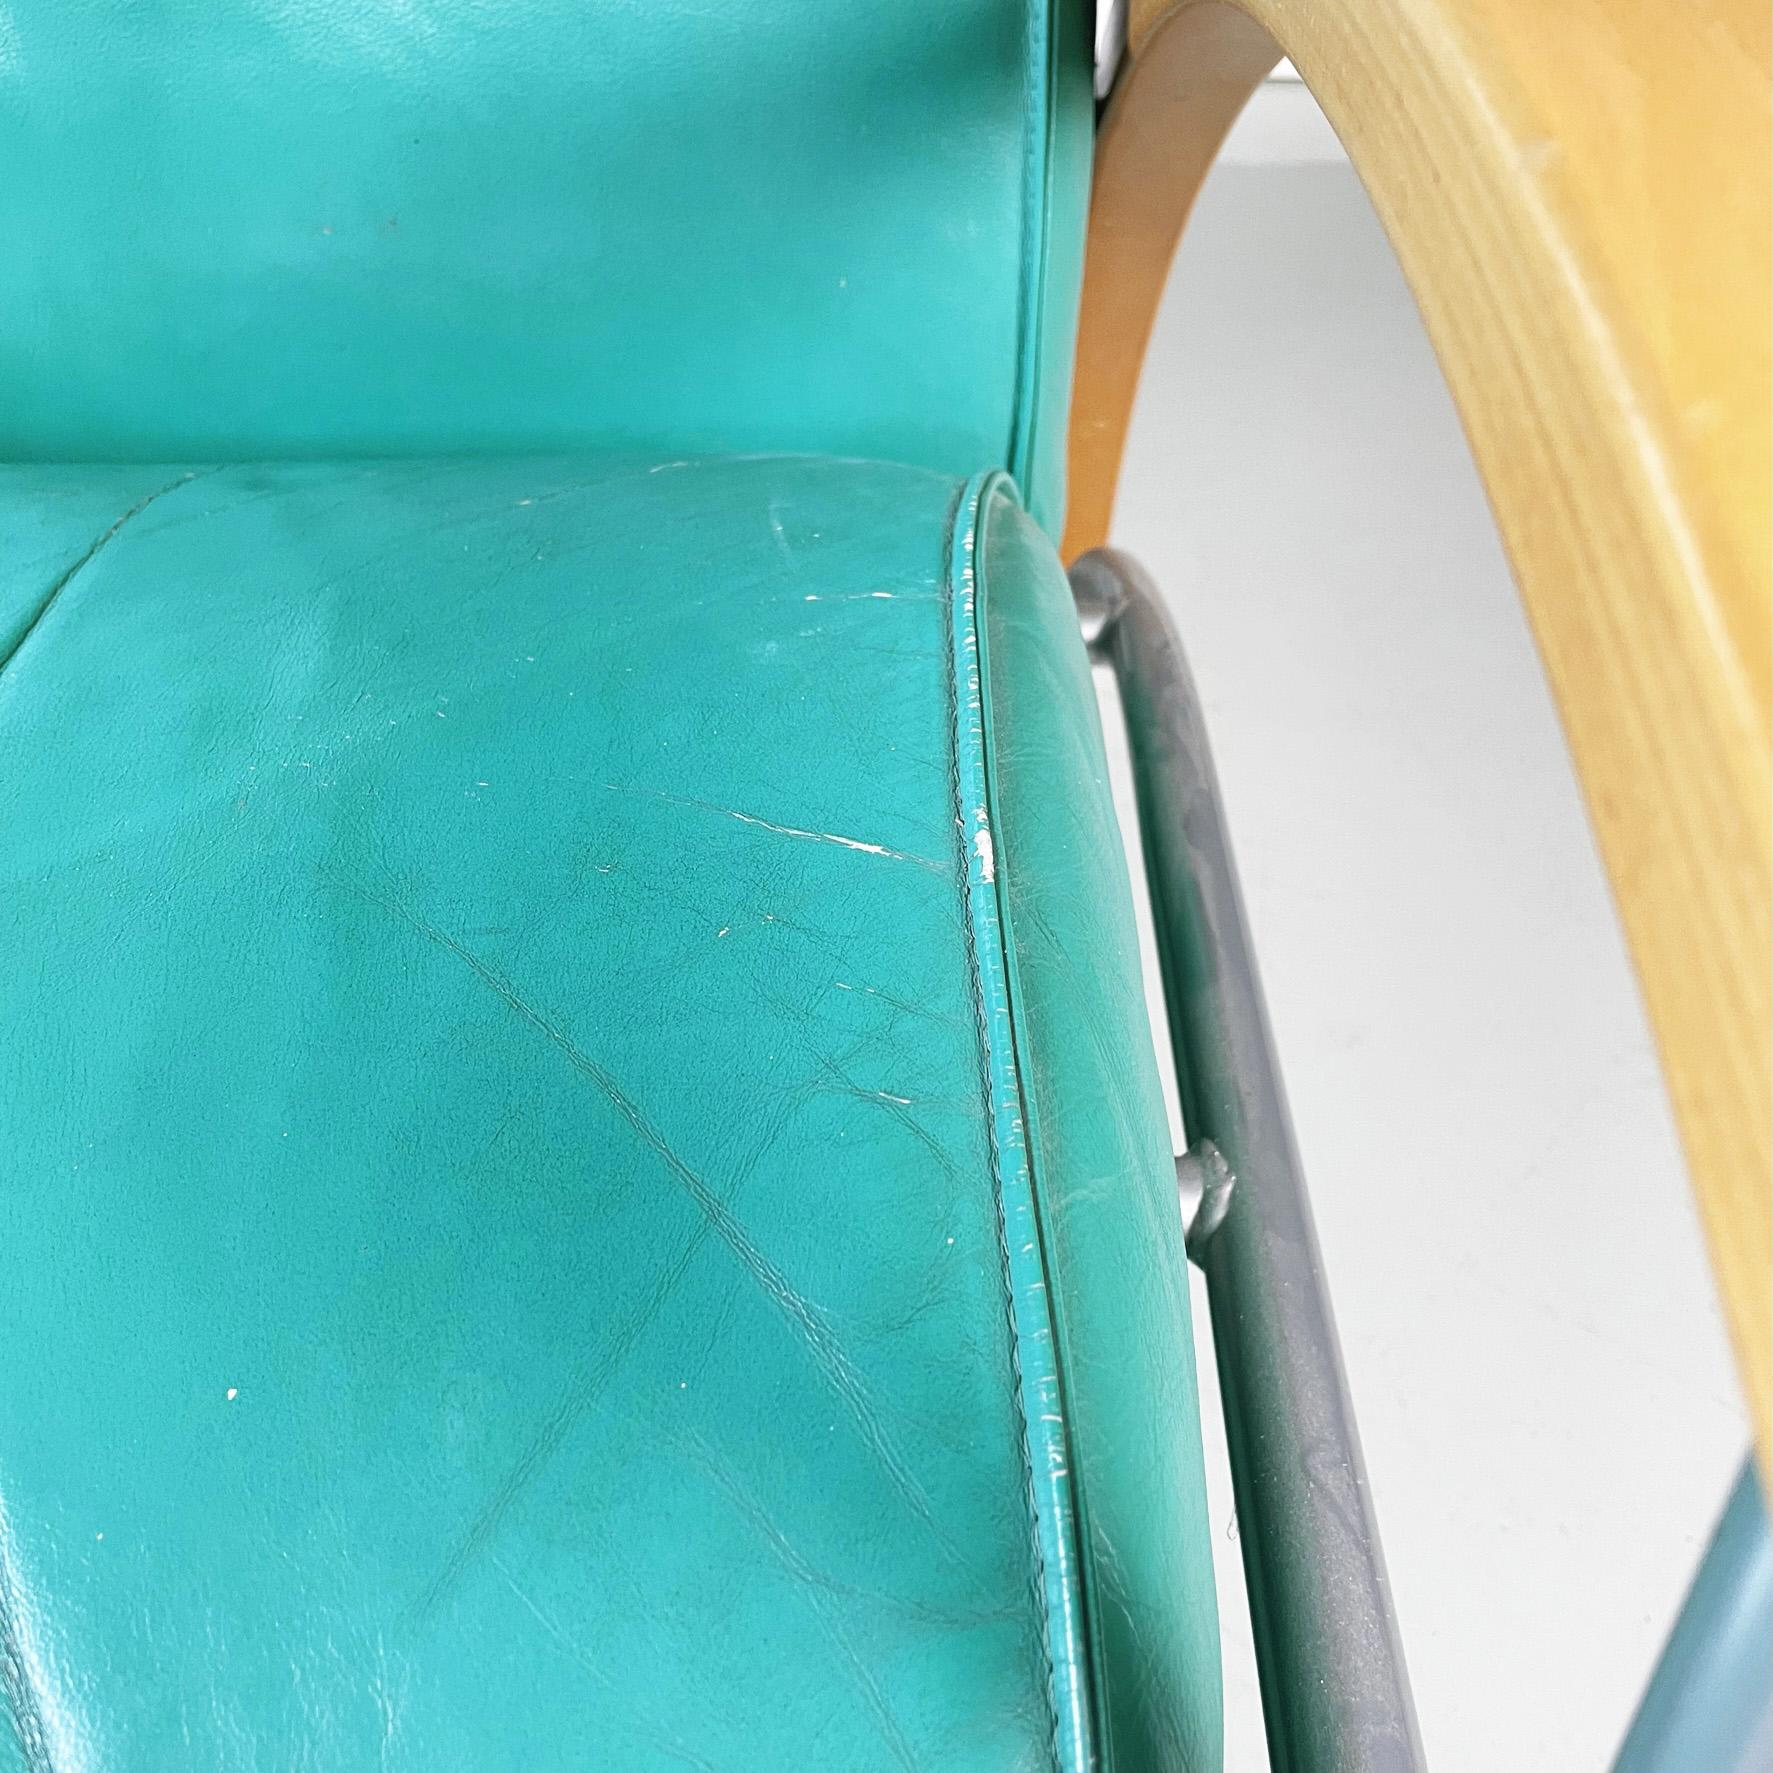 Italian Modern Armchair in Aqua-Green Leather, Wood and Metal, 1980s For Sale 7